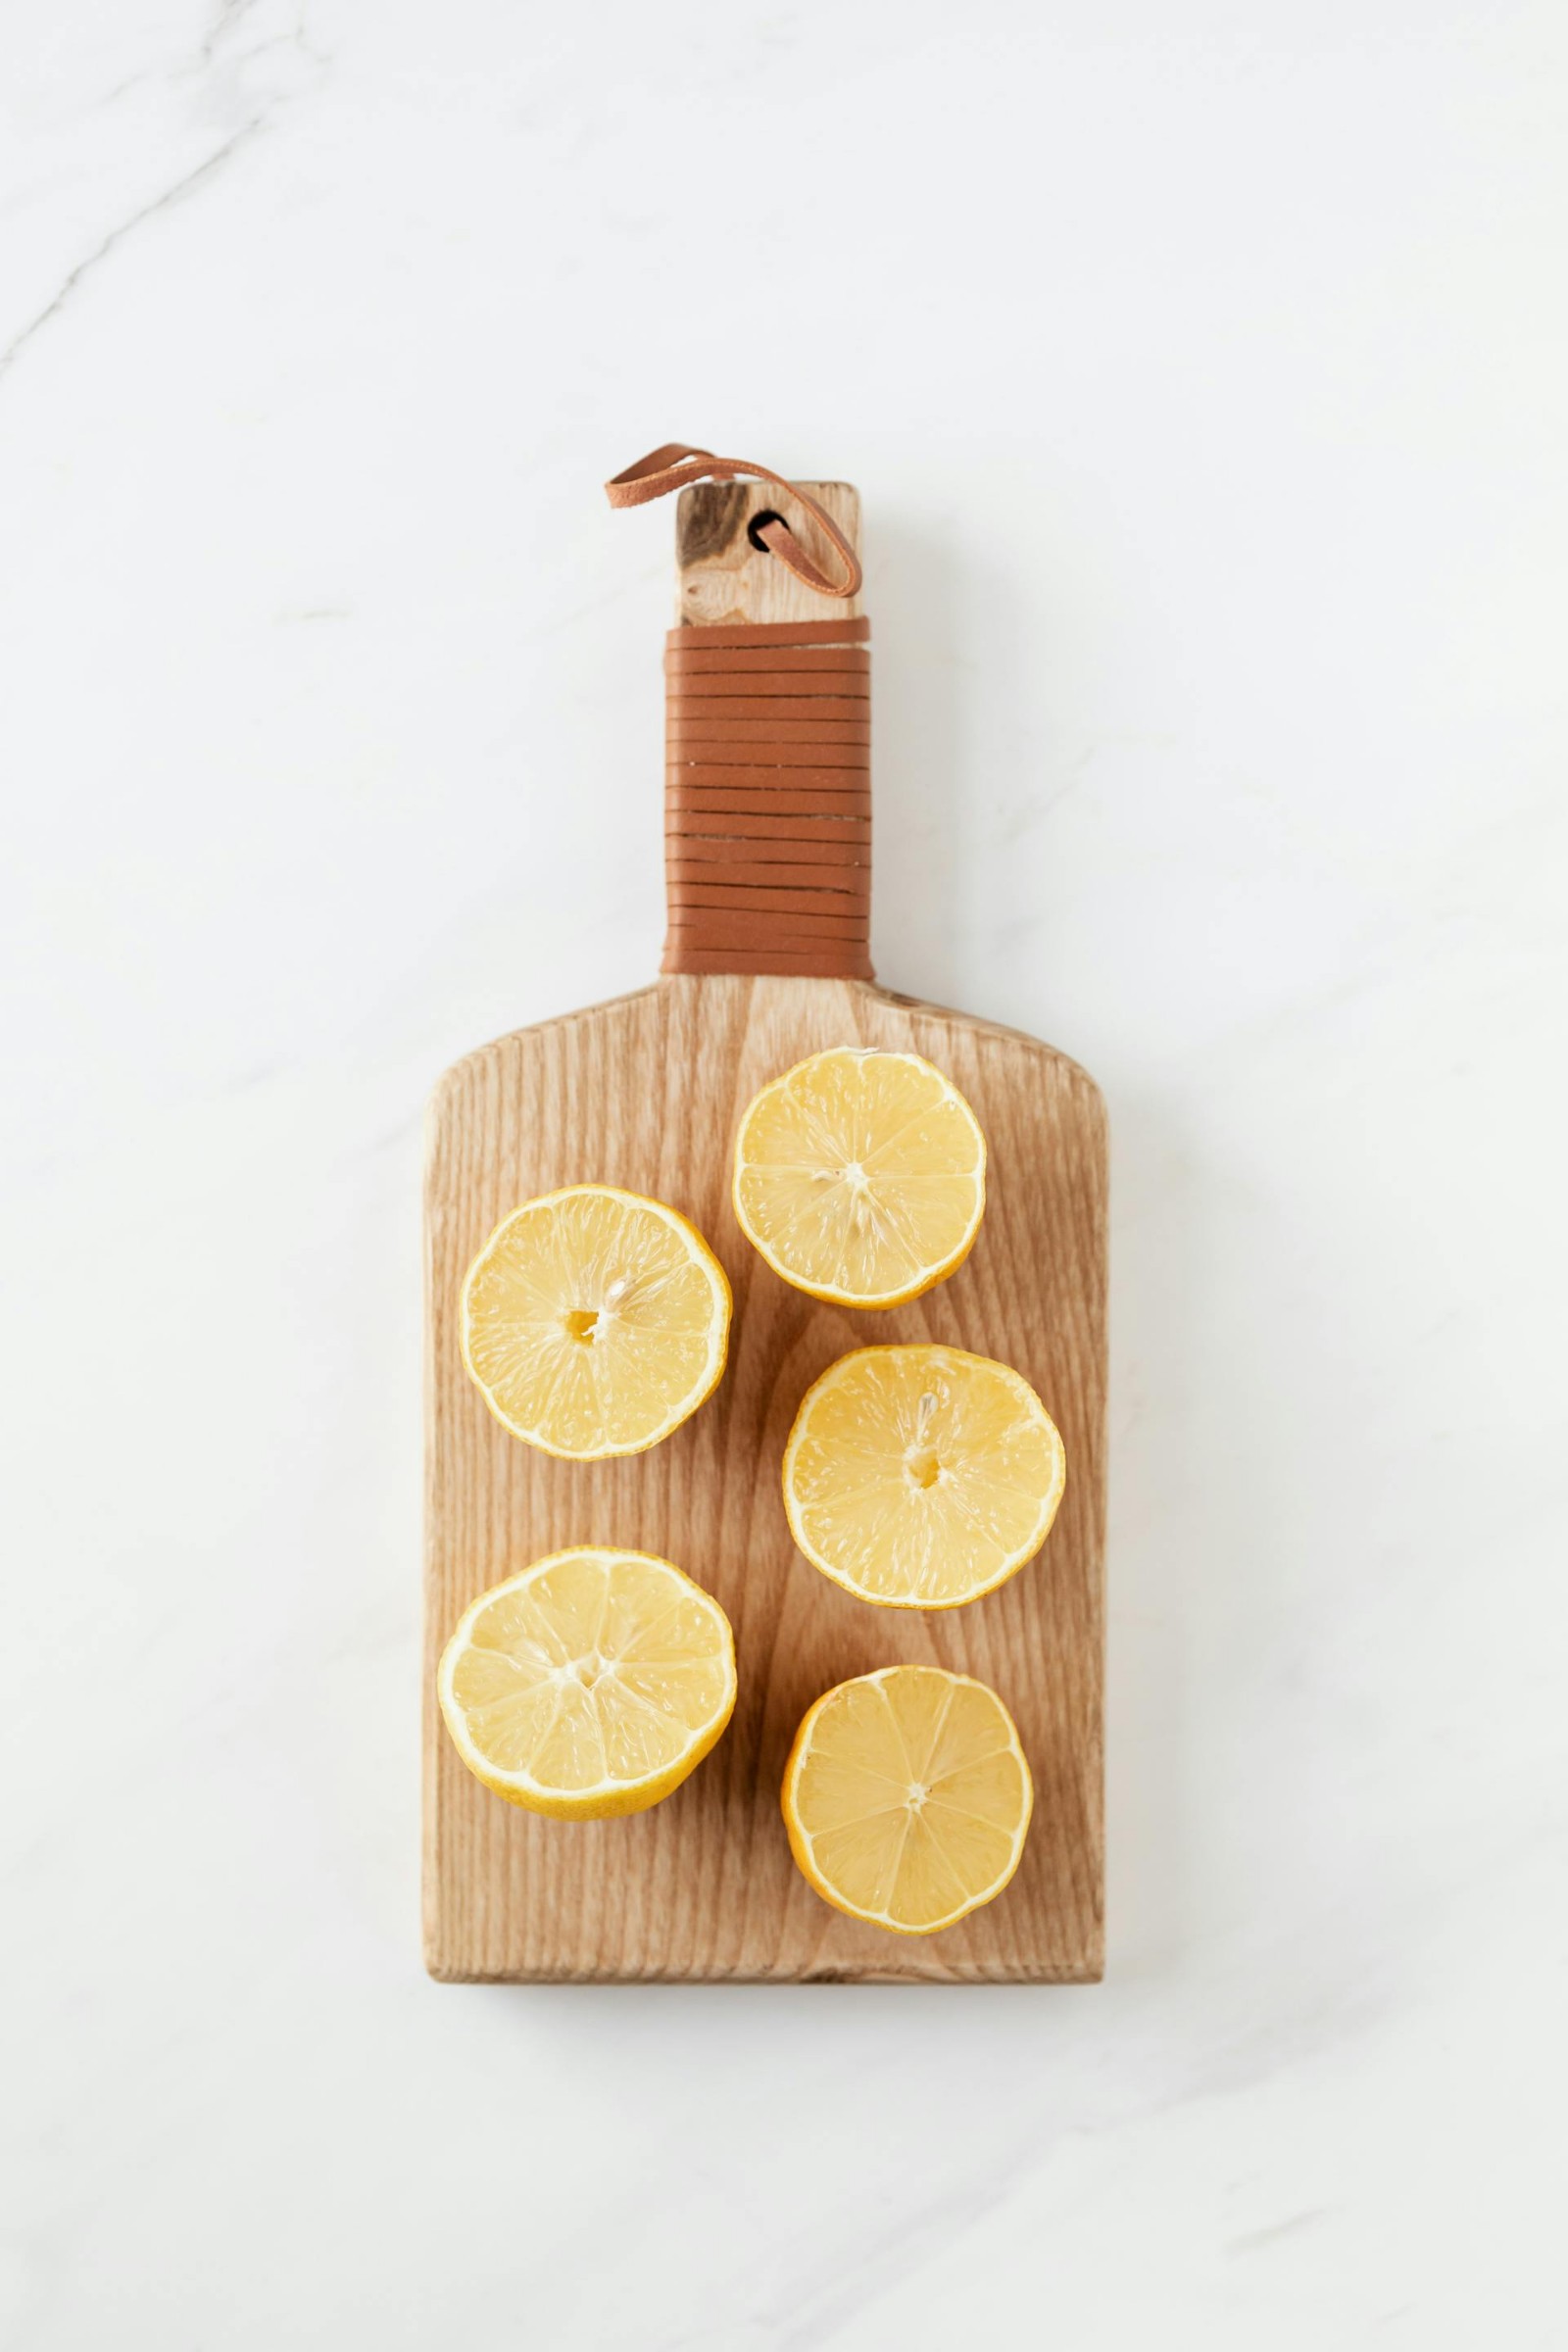 A wooden cutting board with sliced lemons.